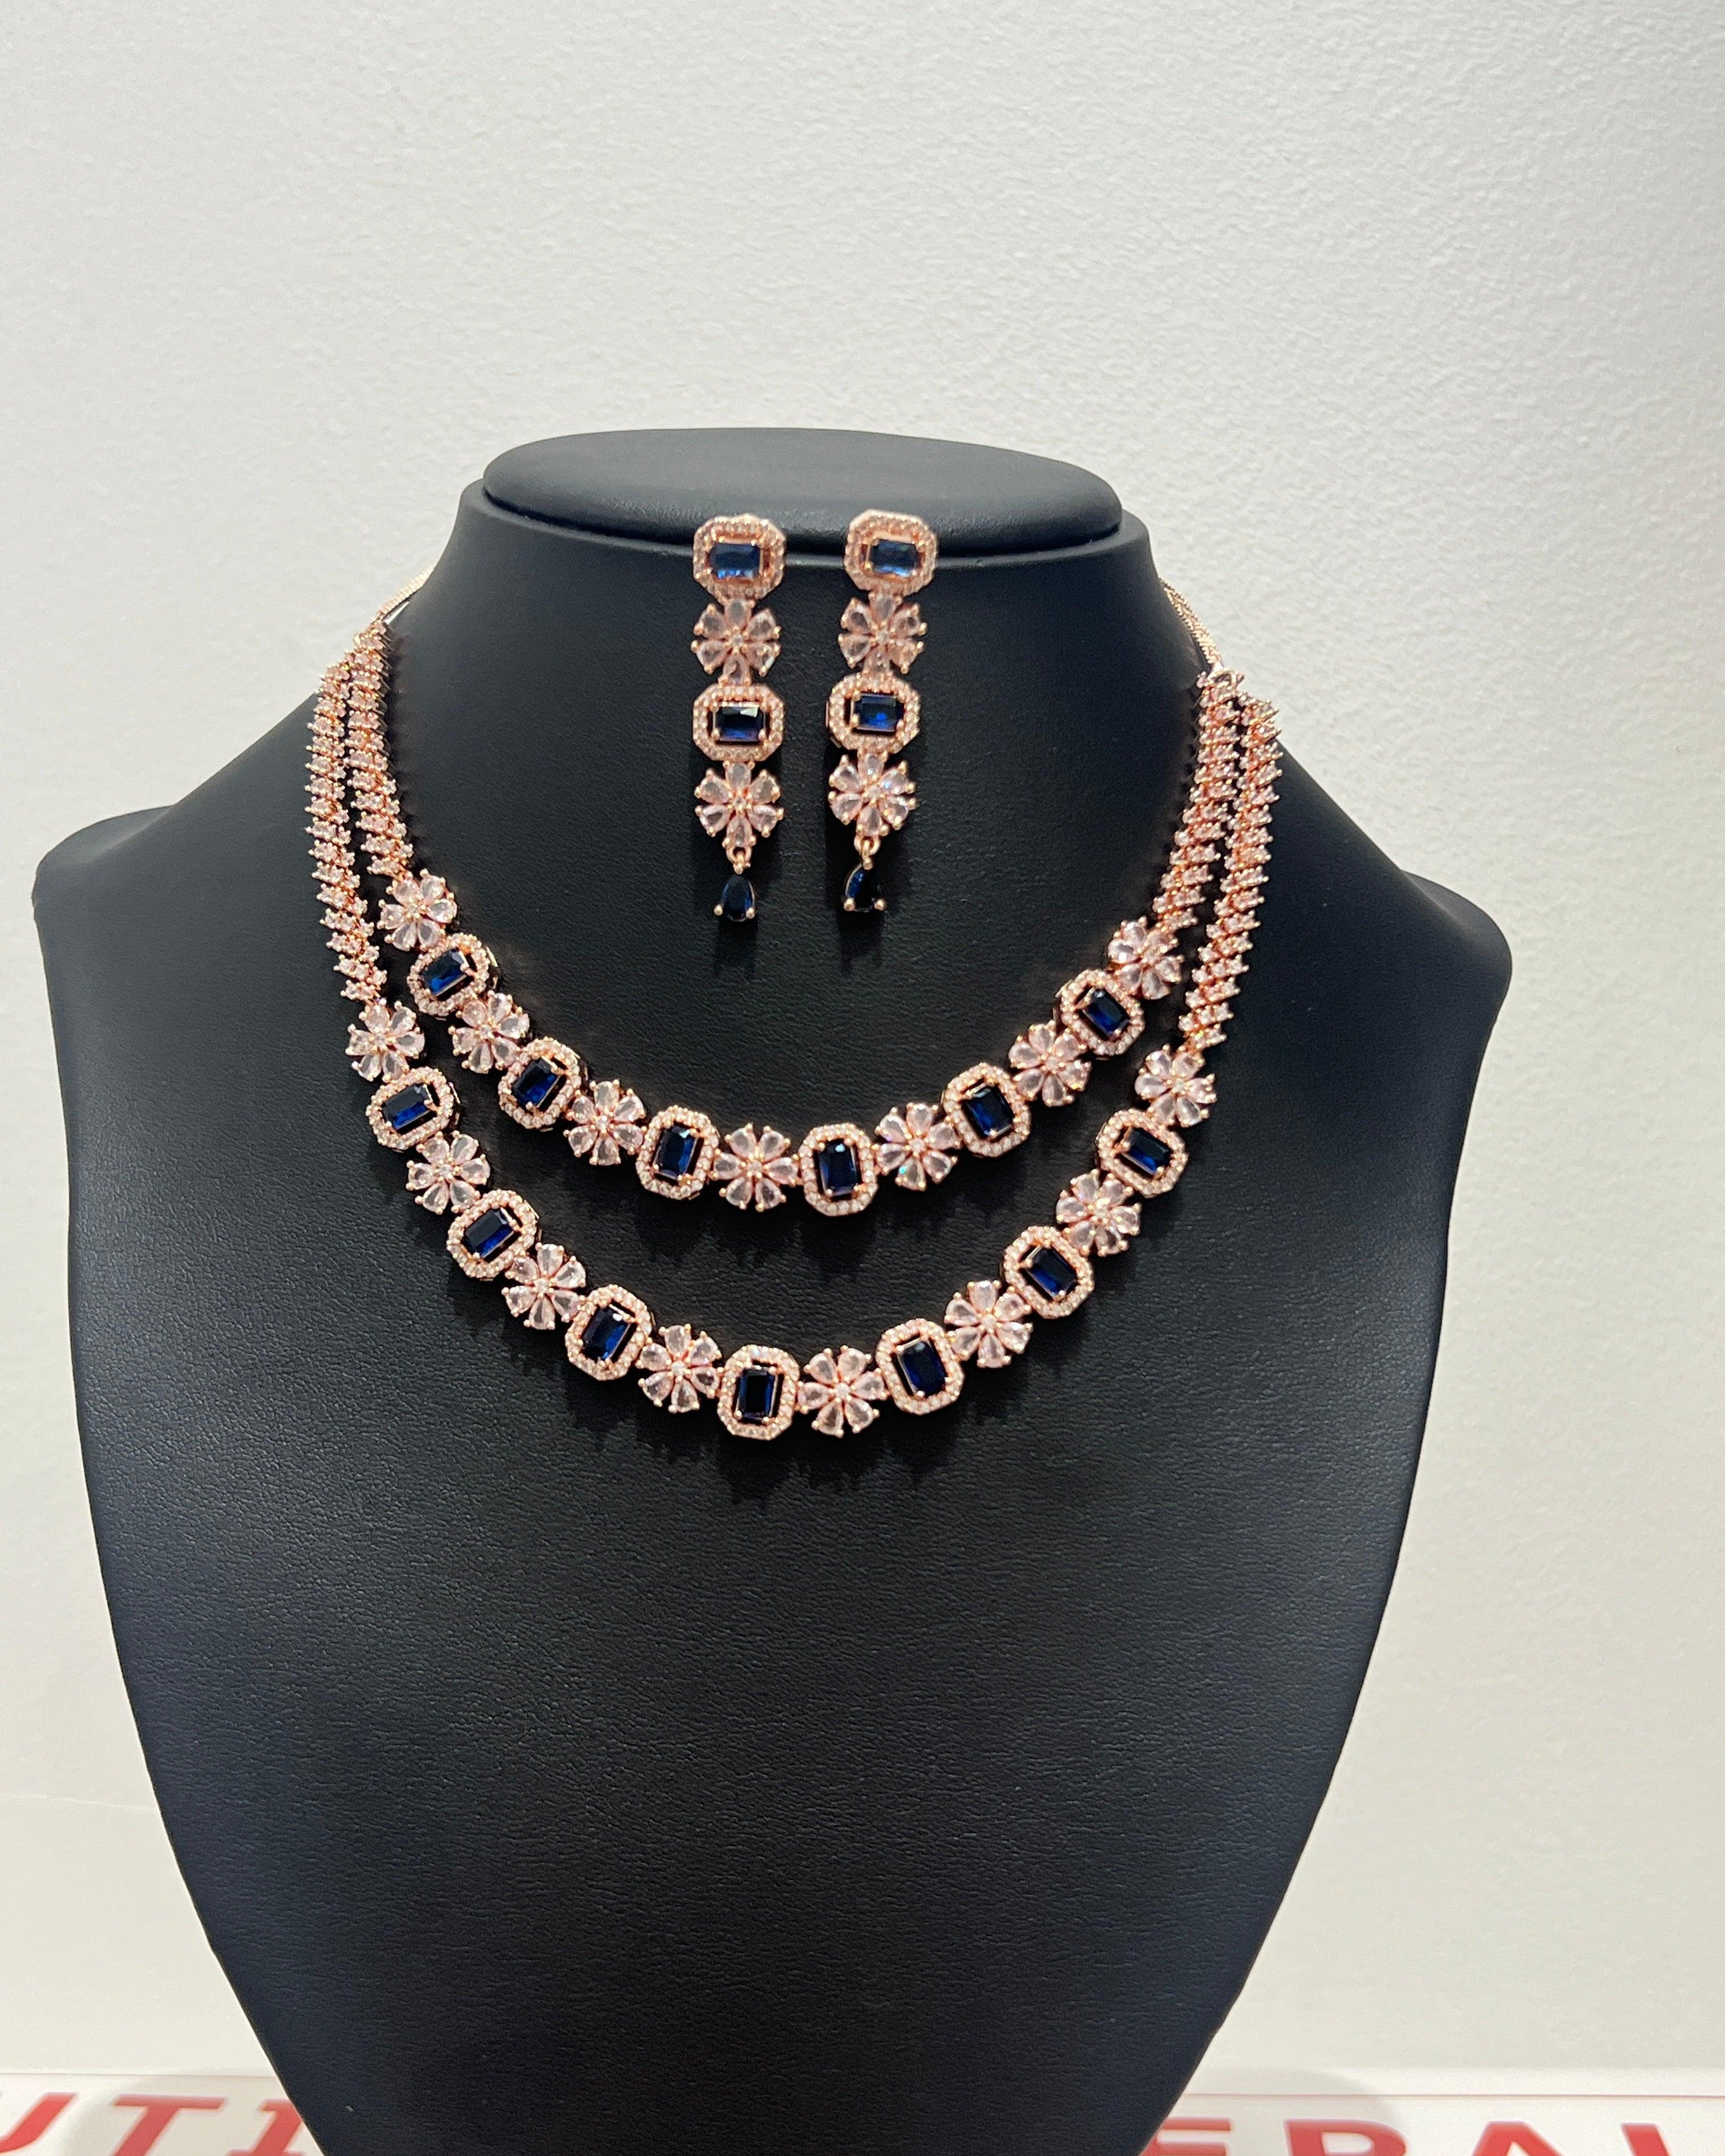 Double Layer American Diamond Necklace Set Rose Gold With Royal Blue Stone - Boutique Nepal Australia 